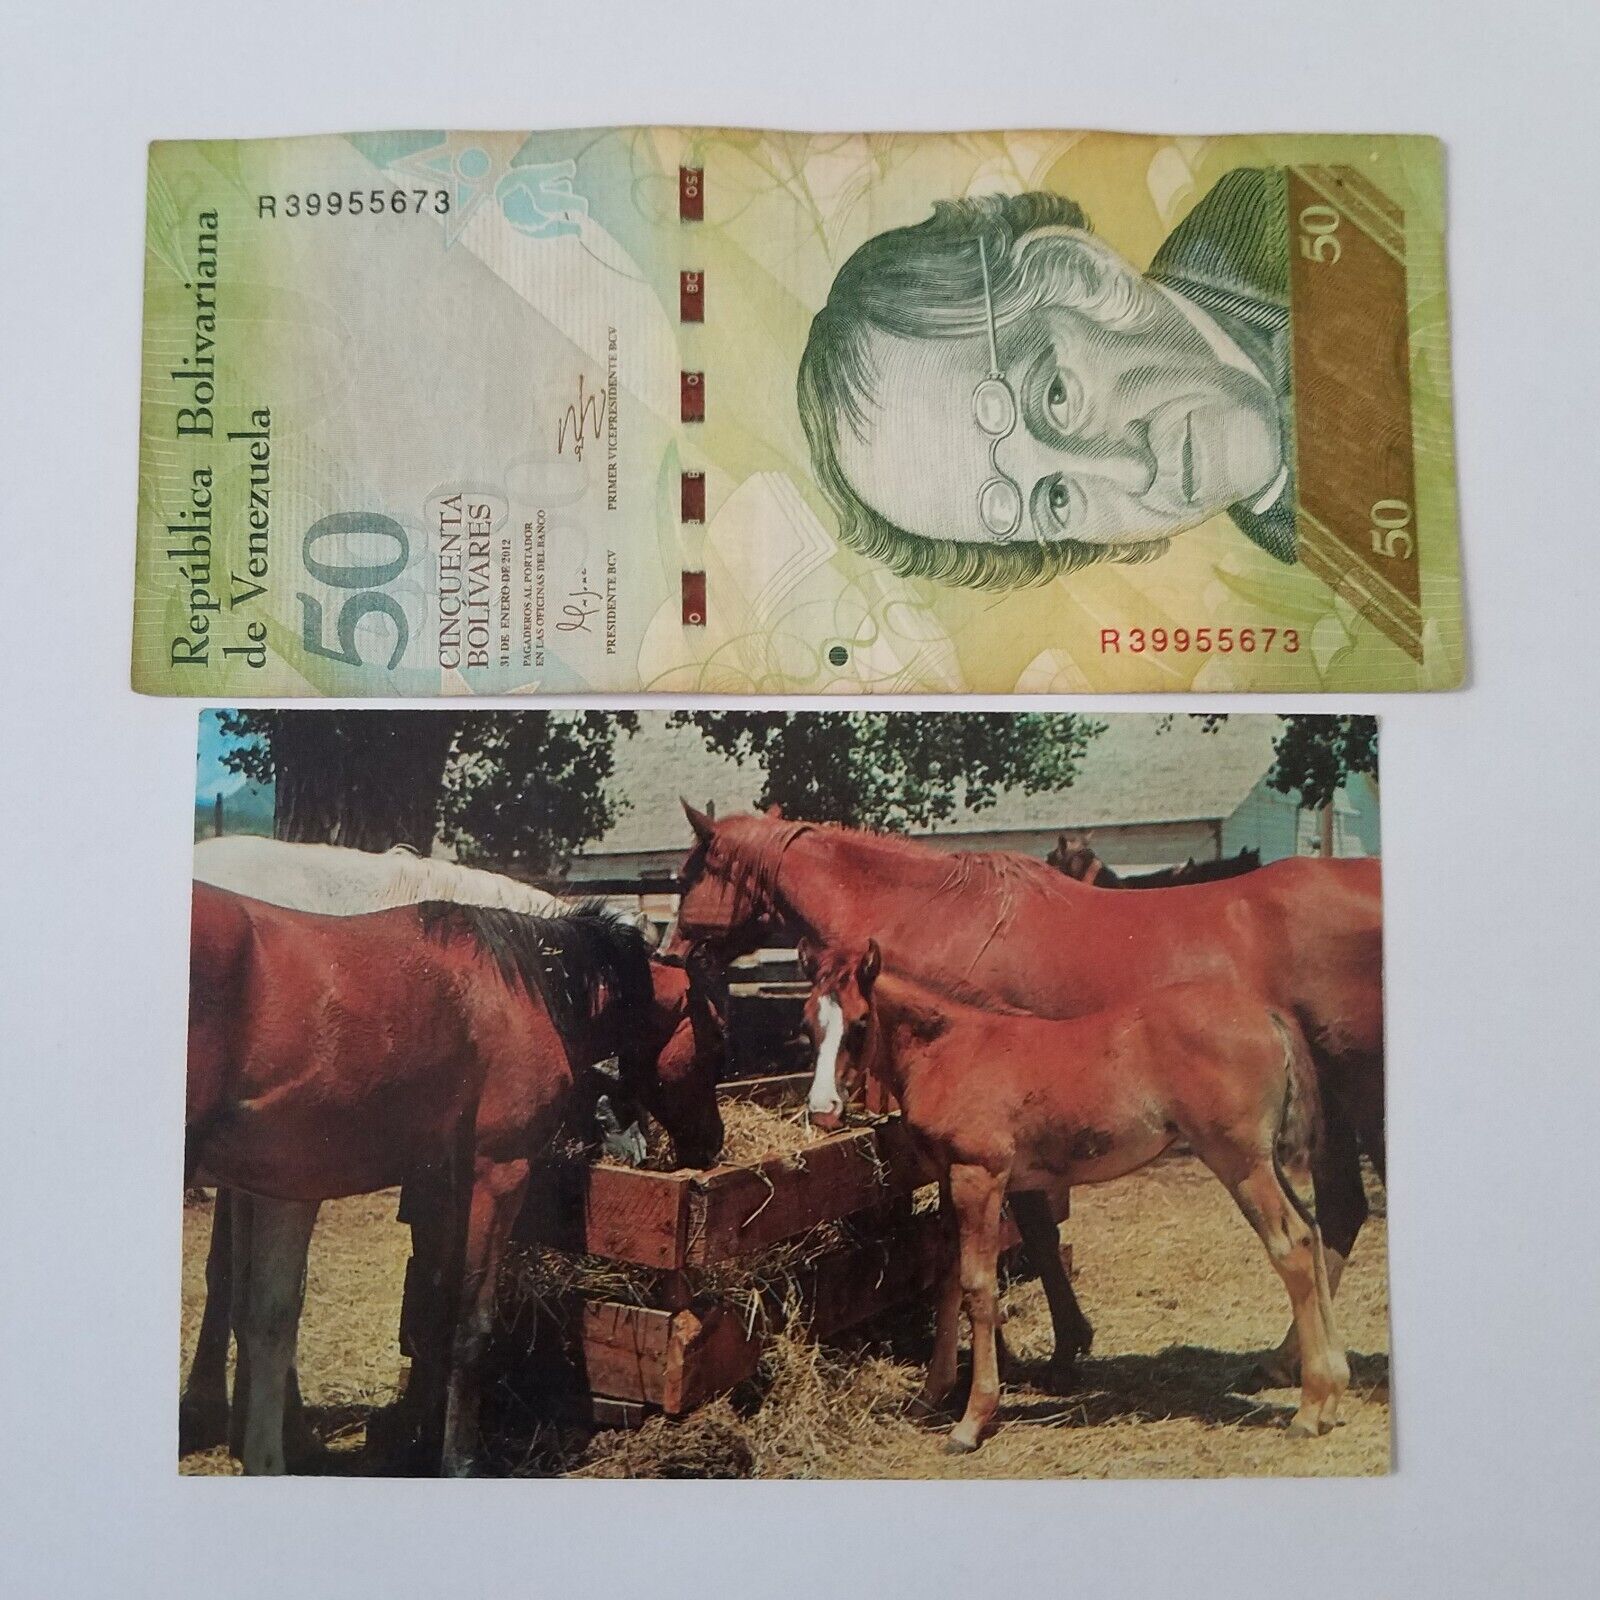 The Curious Colt-Horses Eating Out Of Hay Bunk 50 Venezuela bolivar currency JJ